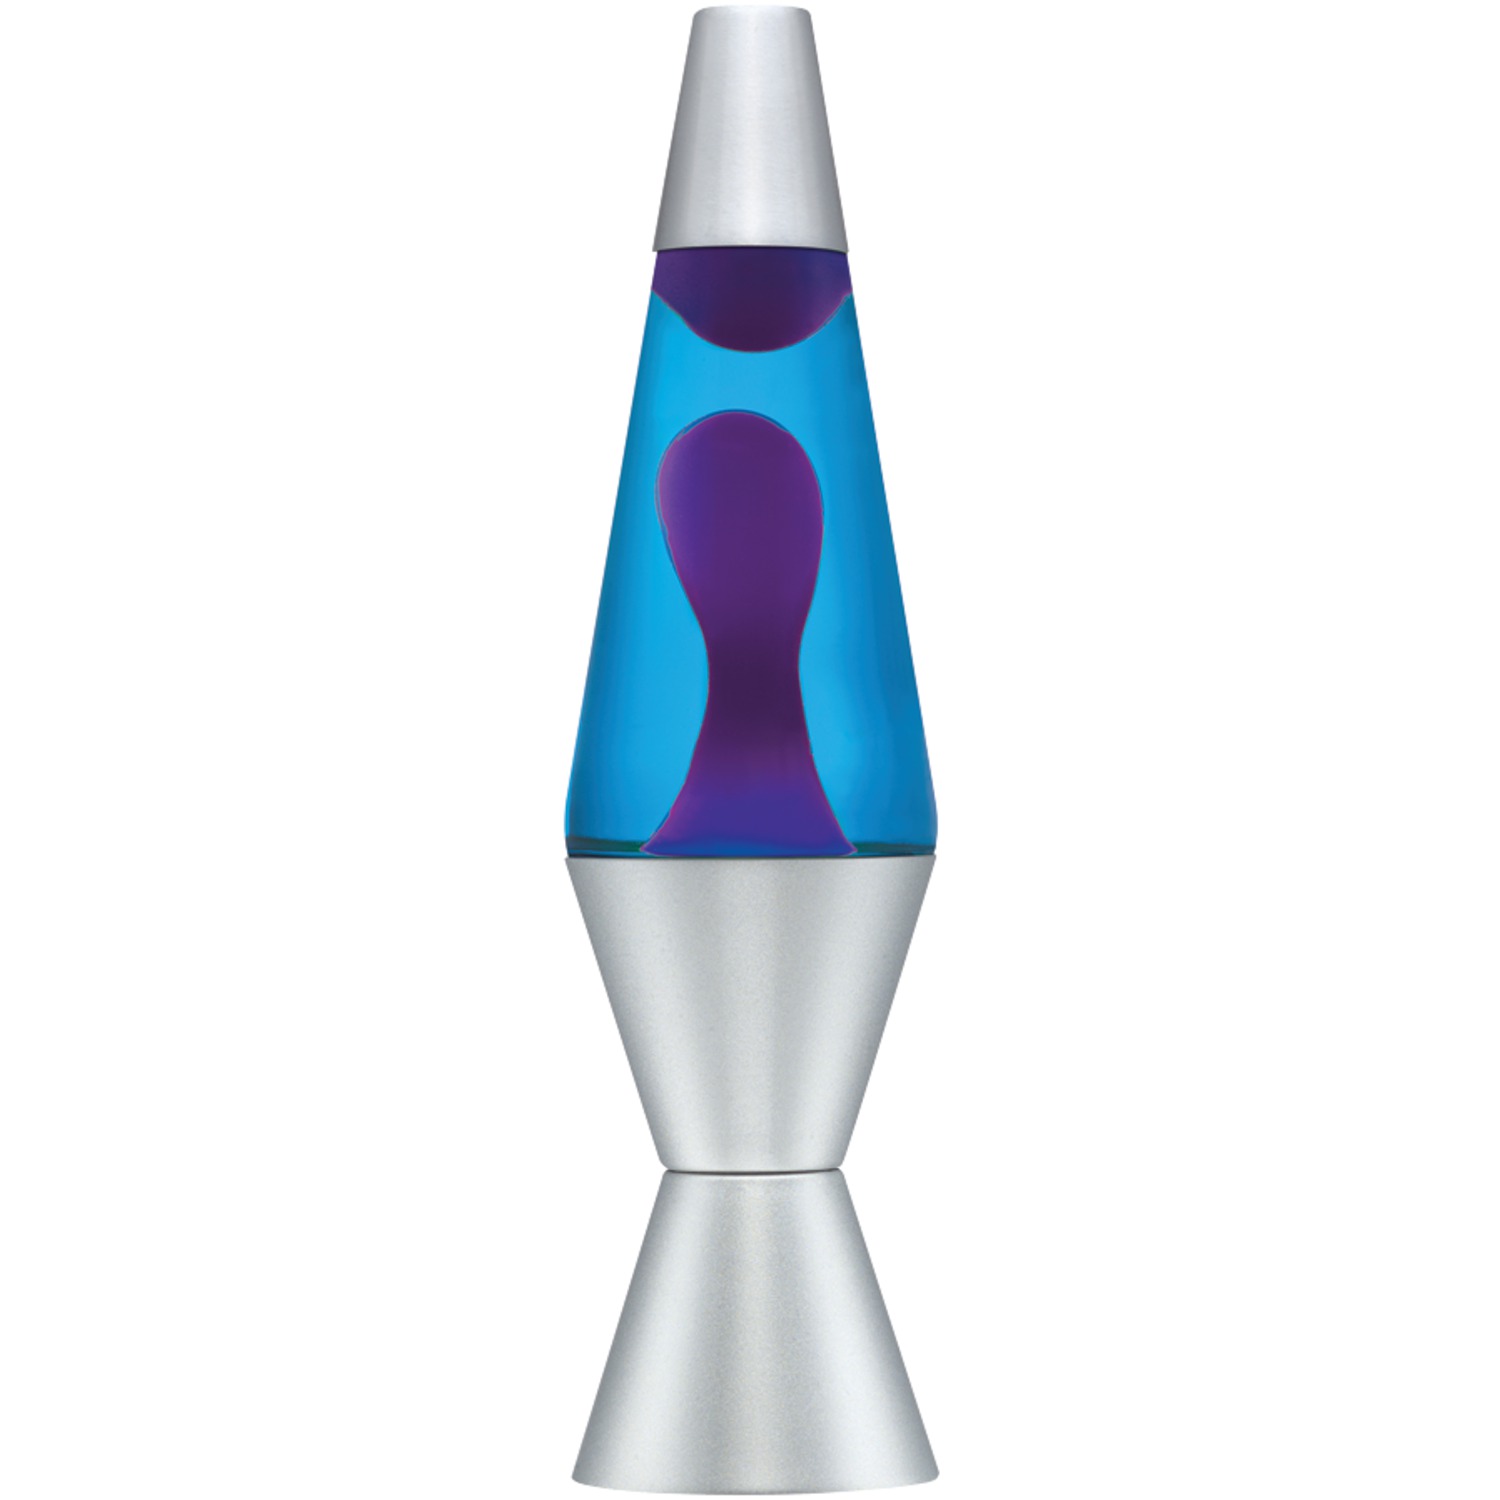 Lava the Original 14.5-Inch Silver Base Lamp with Purple Wax in Blue Liquid - image 1 of 6